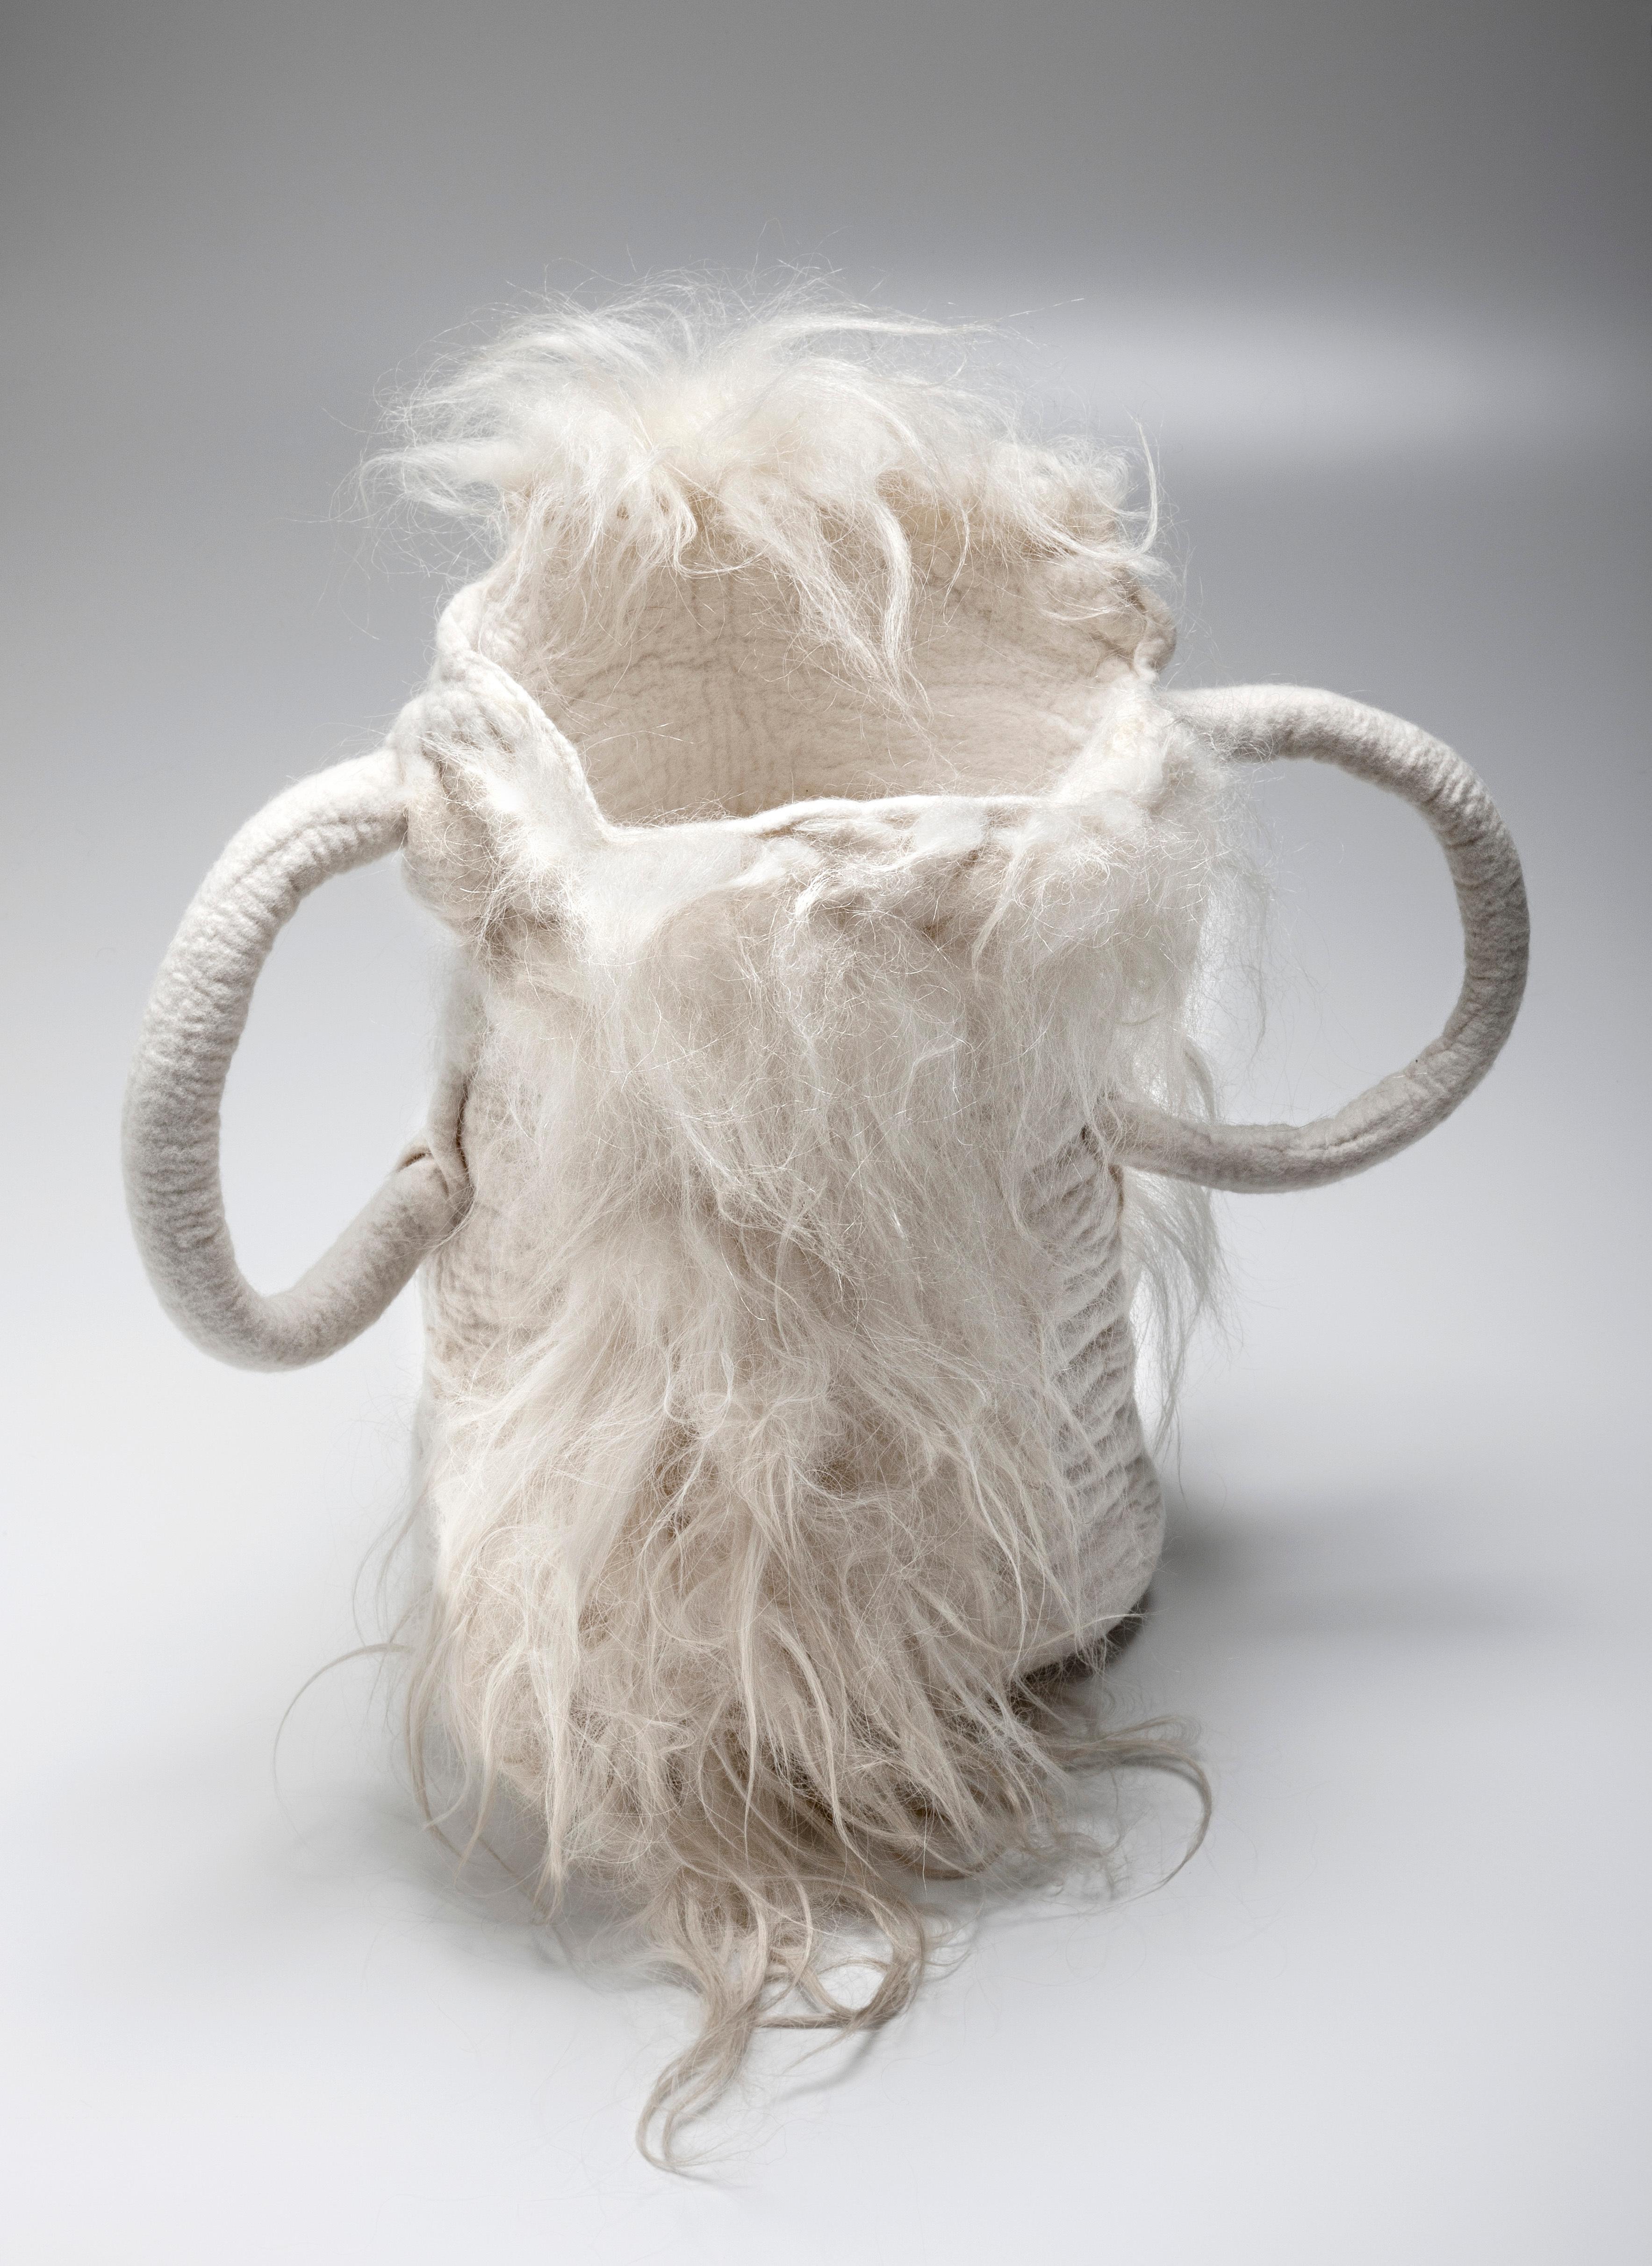 Rustic “Poeira ”, Naturally Dyed Felted Wool Vase by Inês Schertel, Brazil, 2021 For Sale